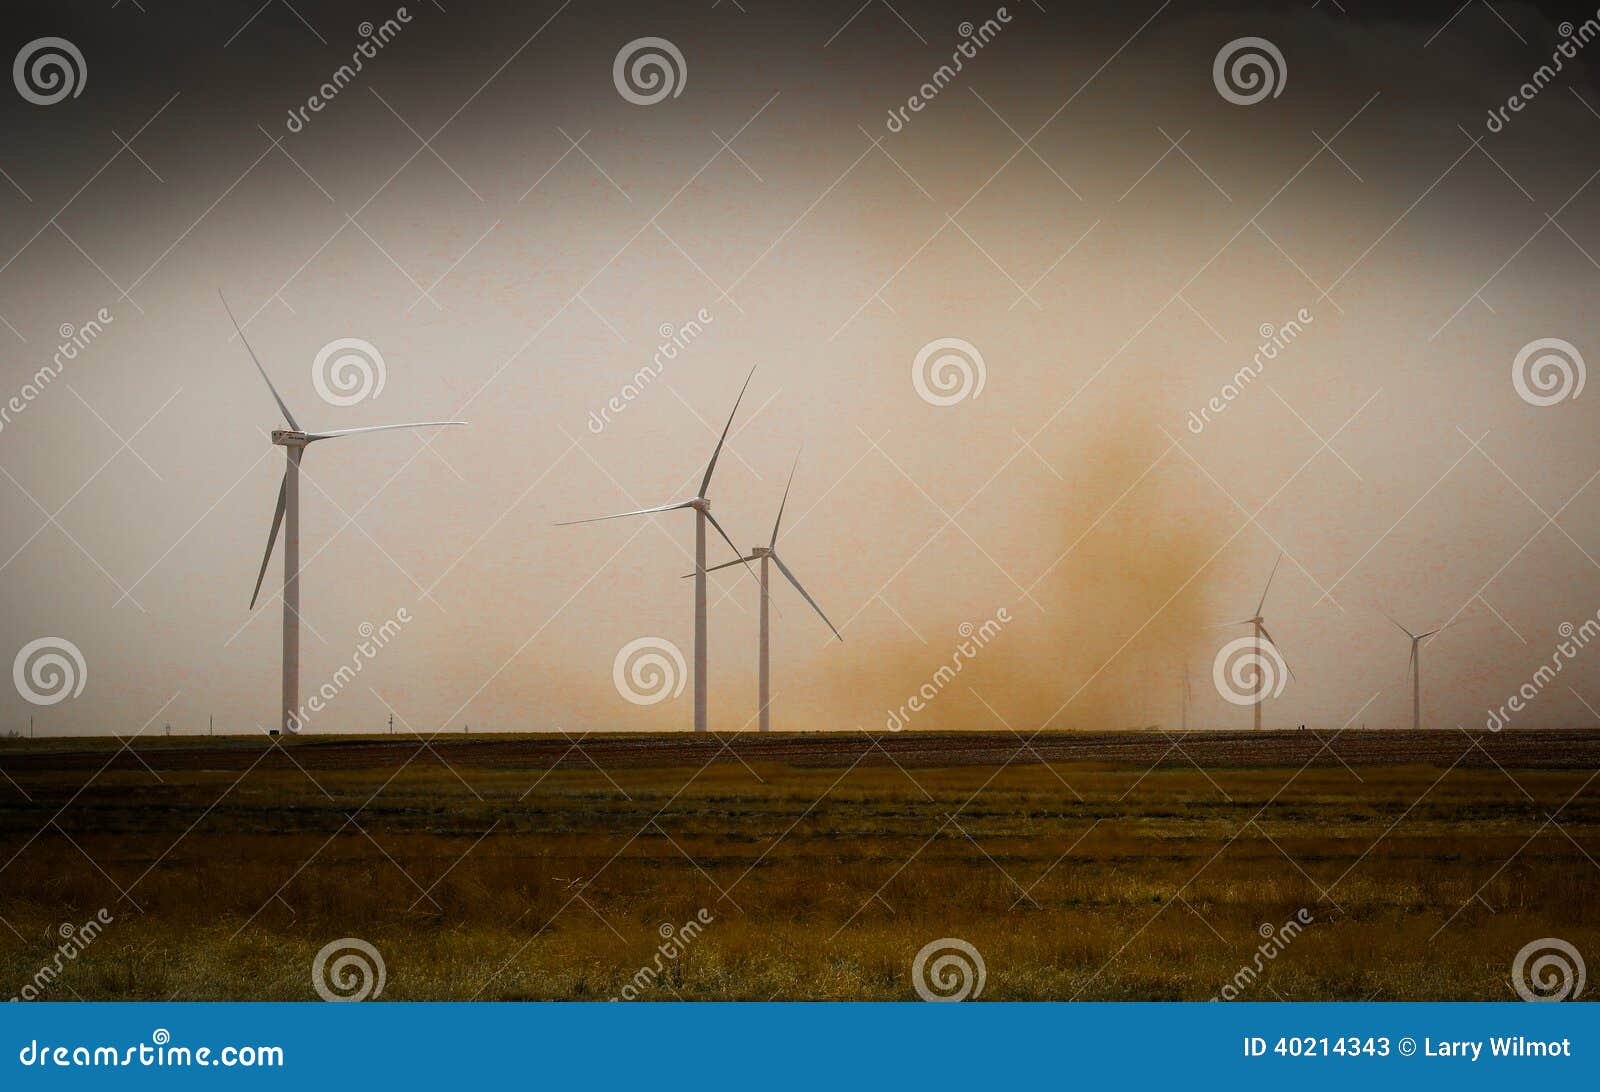 dust storm passes by wind turbines